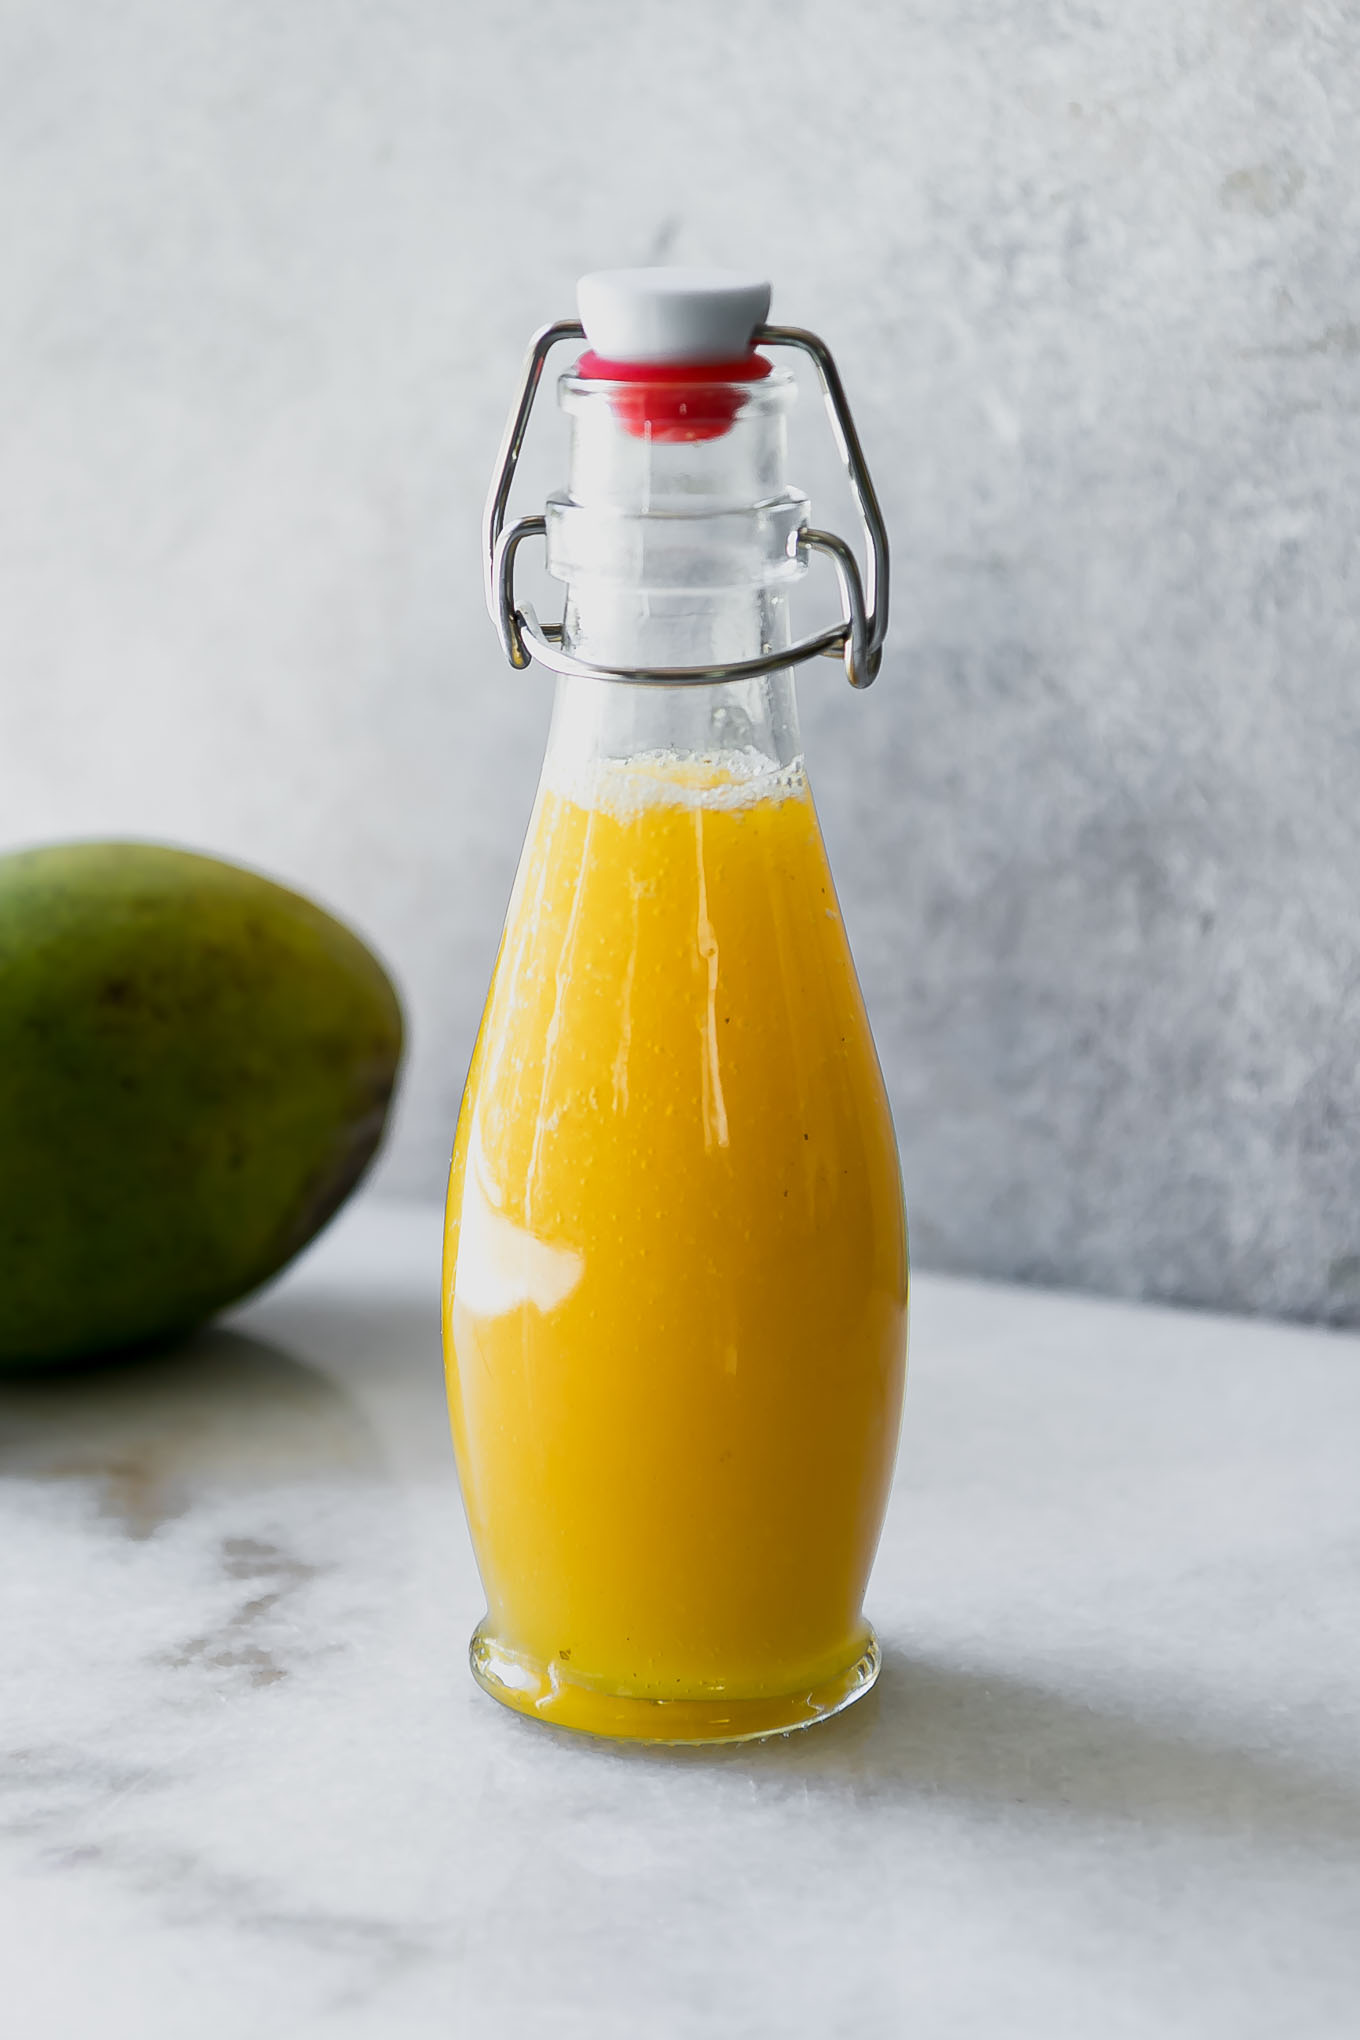 yellow mango infused syrup in a glass jar